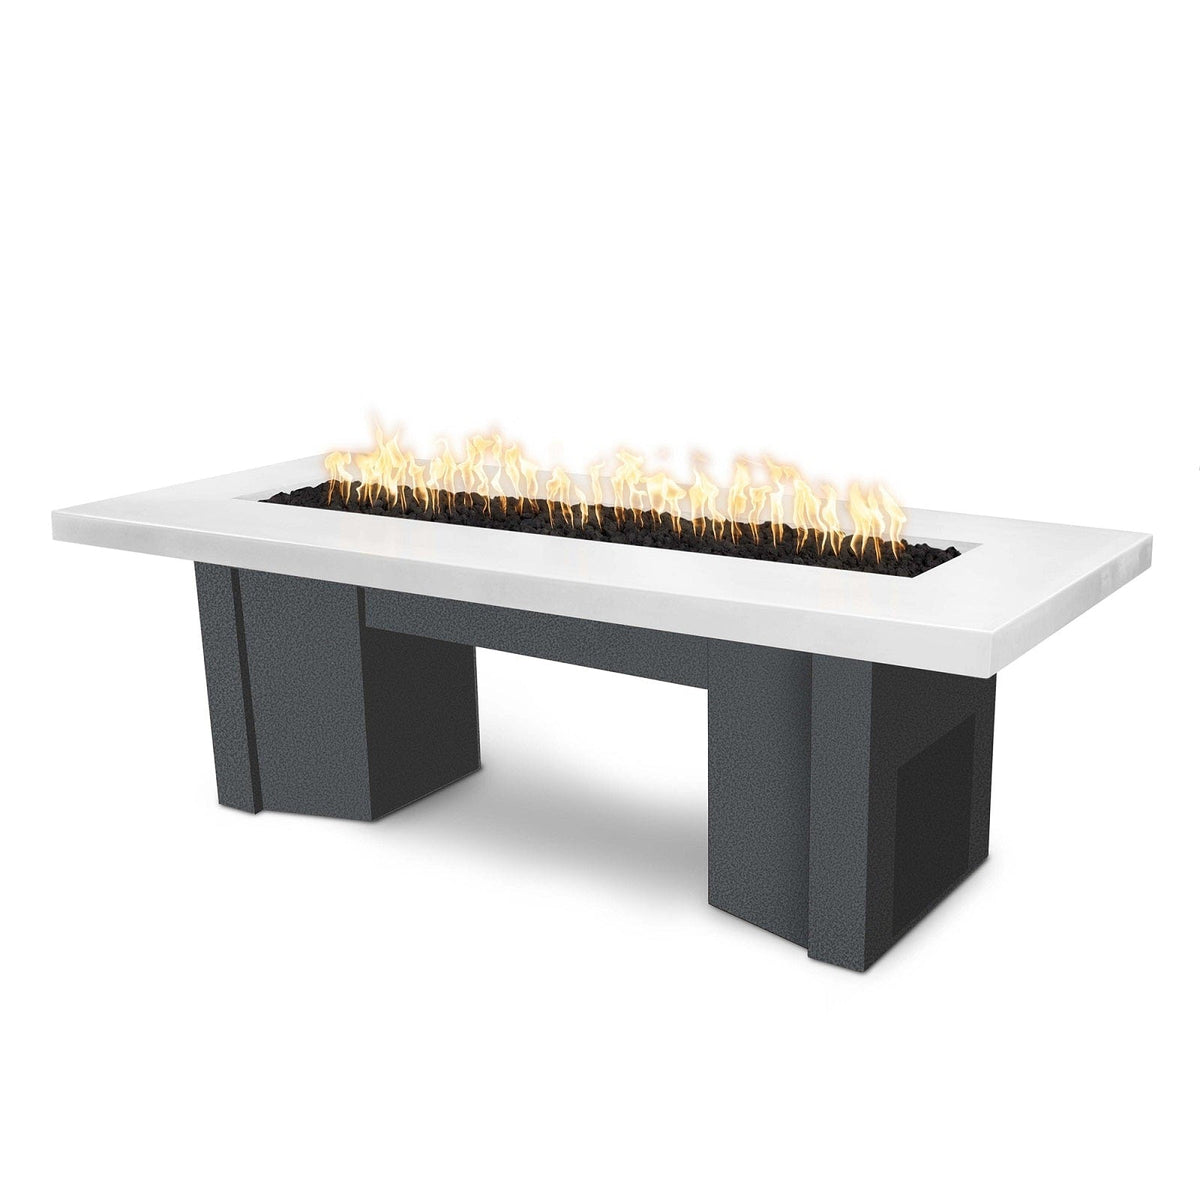 The Outdoor Plus Fire Features Limestone (-LIM) / Silver Vein Powder Coated Steel (-SLV) The Outdoor Plus 78&quot; Alameda Fire Table Smooth Concrete in Liquid Propane - 110V Plug &amp; Play Electronic Ignition / OPT-ALMGFRC78EKIT-LP